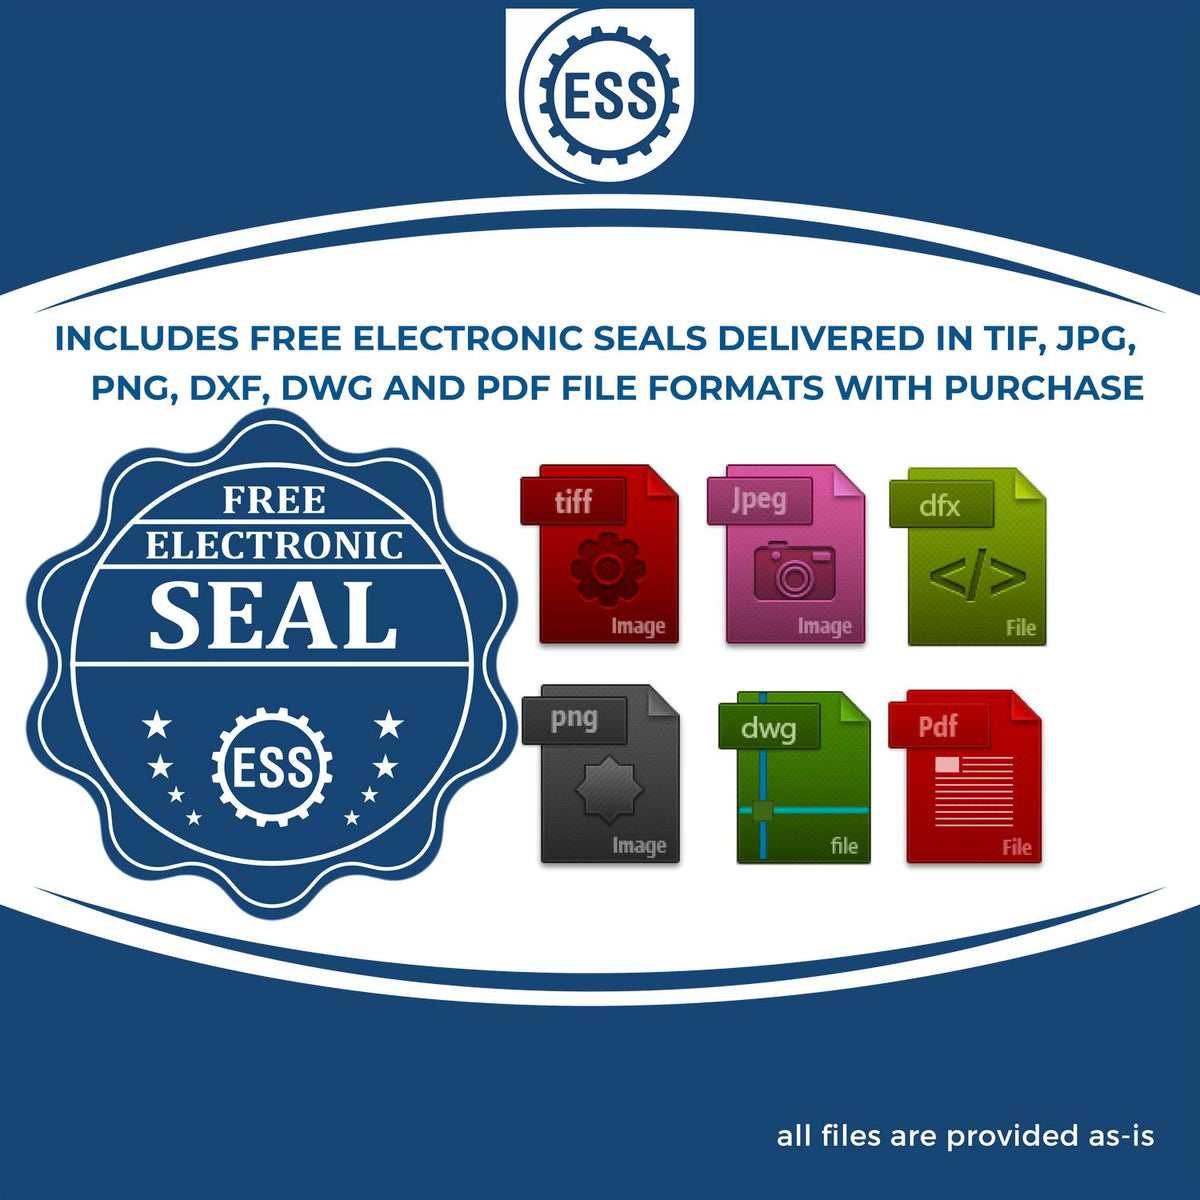 An infographic for the free electronic seal for the State of Wyoming Extended Long Reach Geologist Seal illustrating the different file type icons such as DXF, DWG, TIF, JPG and PNG.